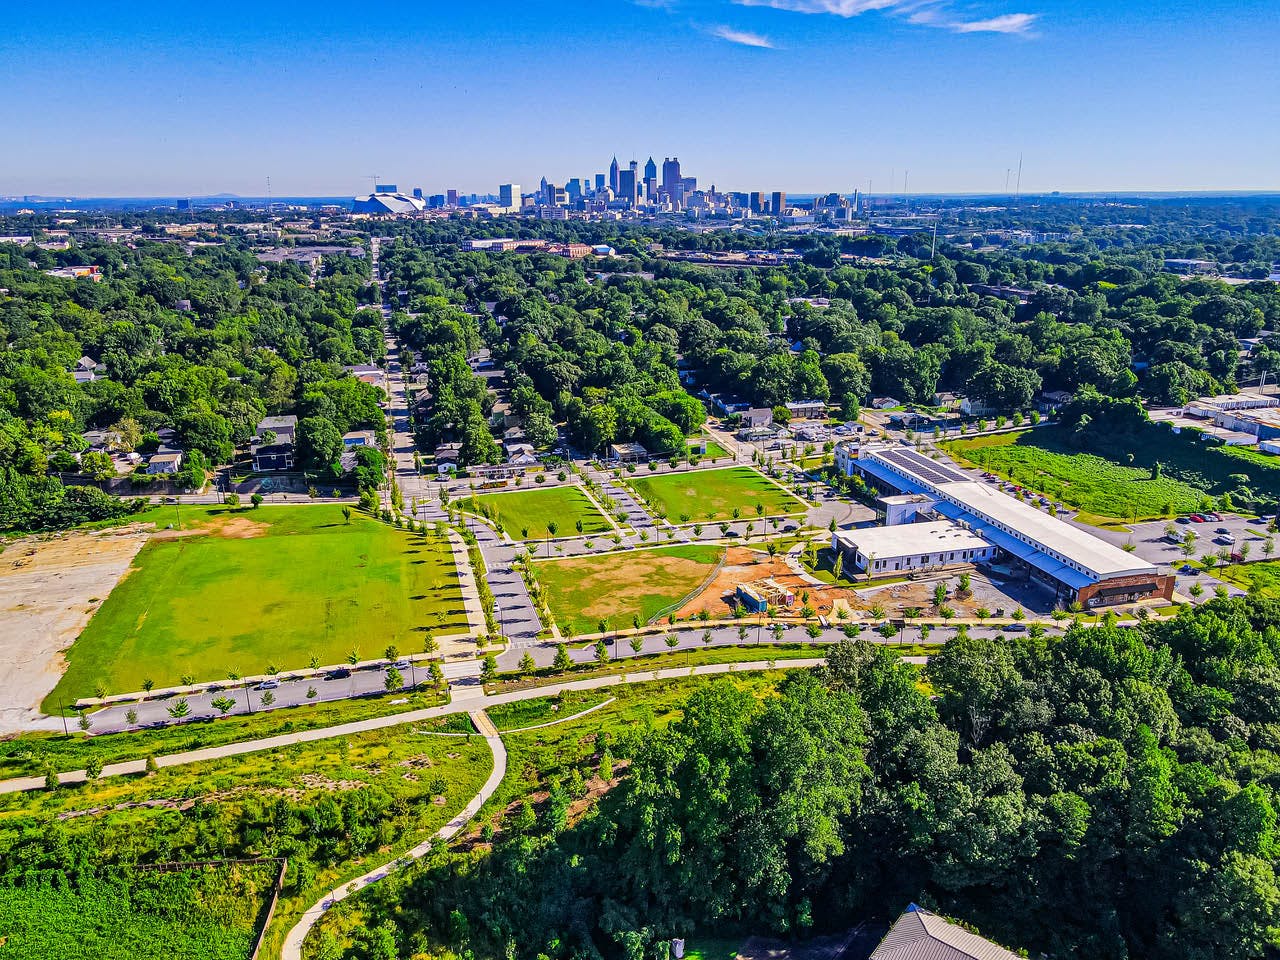 Drone image of the Southside Trail with the Atlanta skyline in the background. Photo by LoKnows Drones.